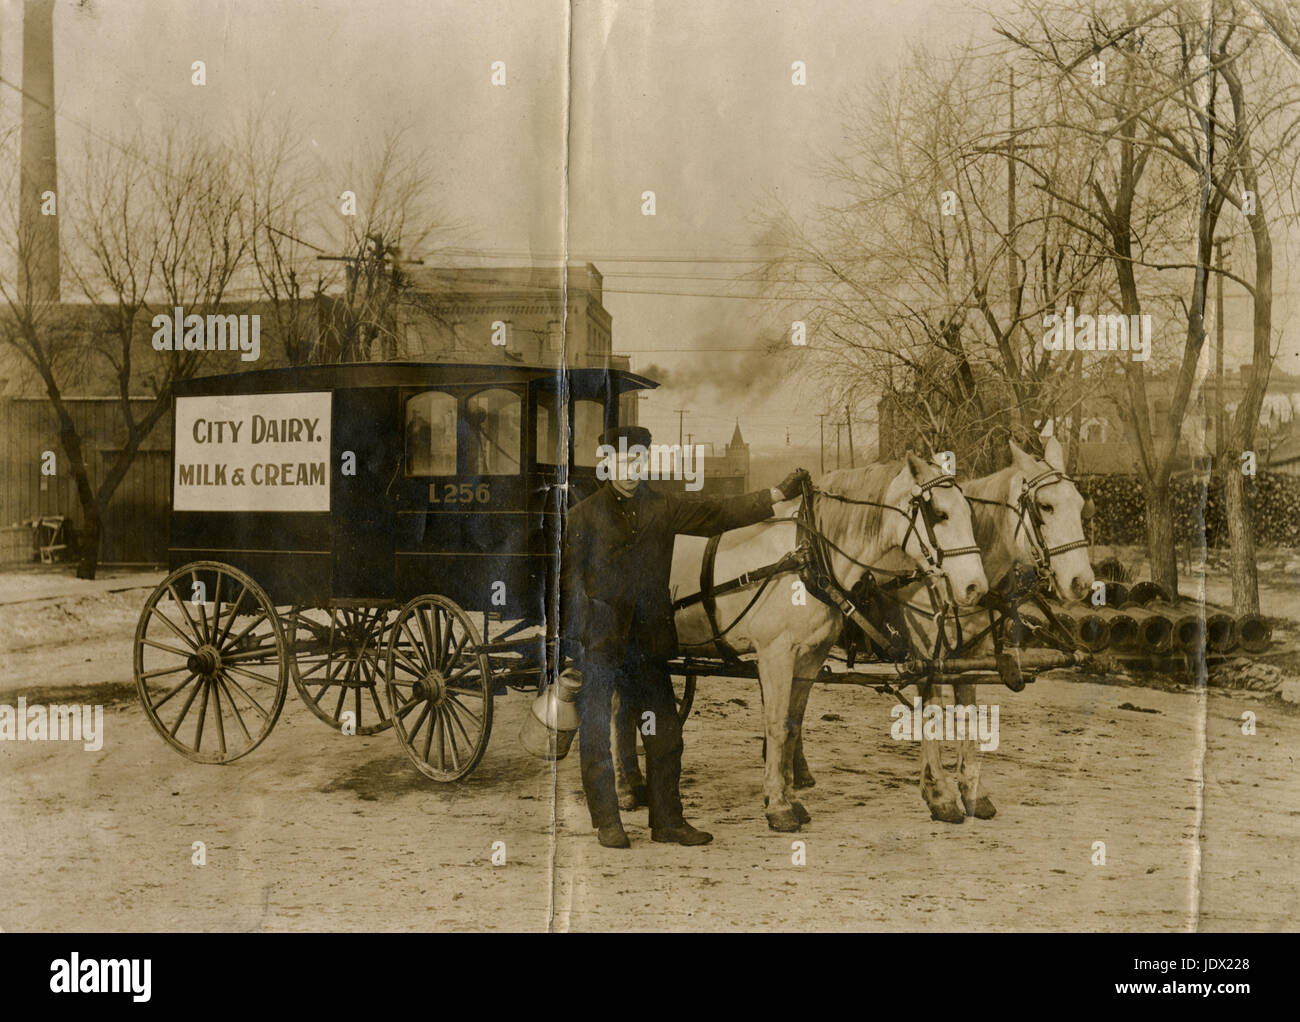 Antique c1905 photograph, horse and wagon with driver for City Dairy Milk & Cream in Mankato, Minnesota.  SOURCE: ORIGINAL PHOTOGRAPH. Stock Photo